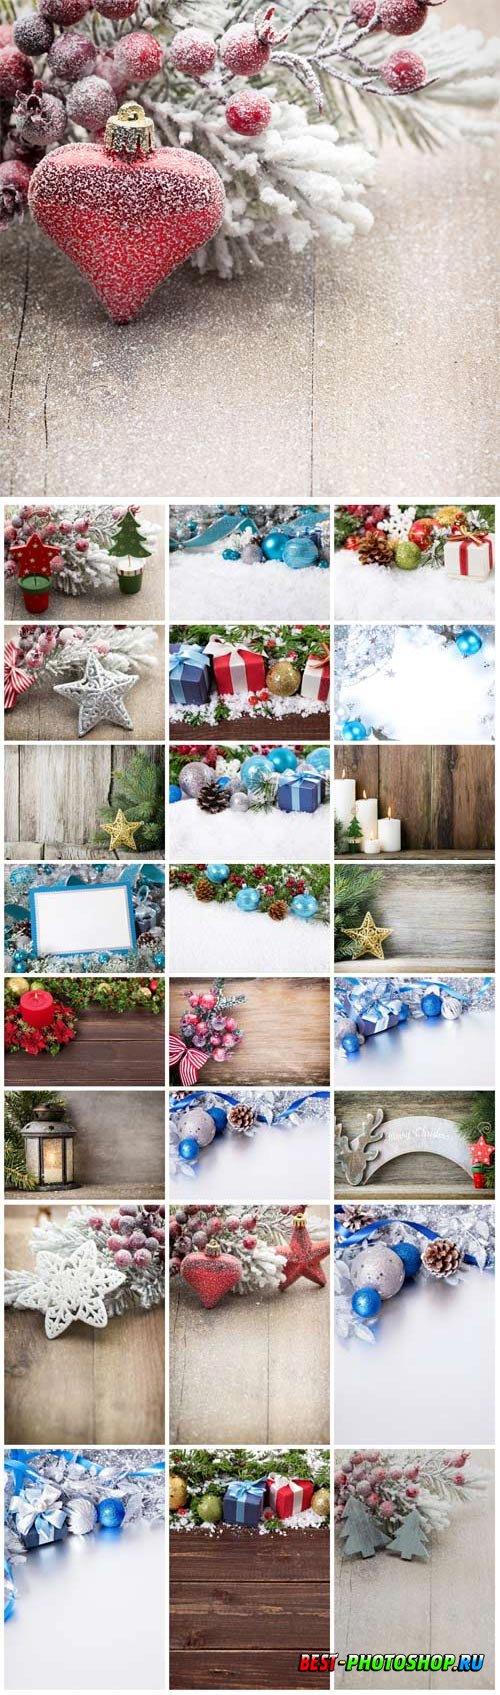 New Year and Christmas stock photos 22